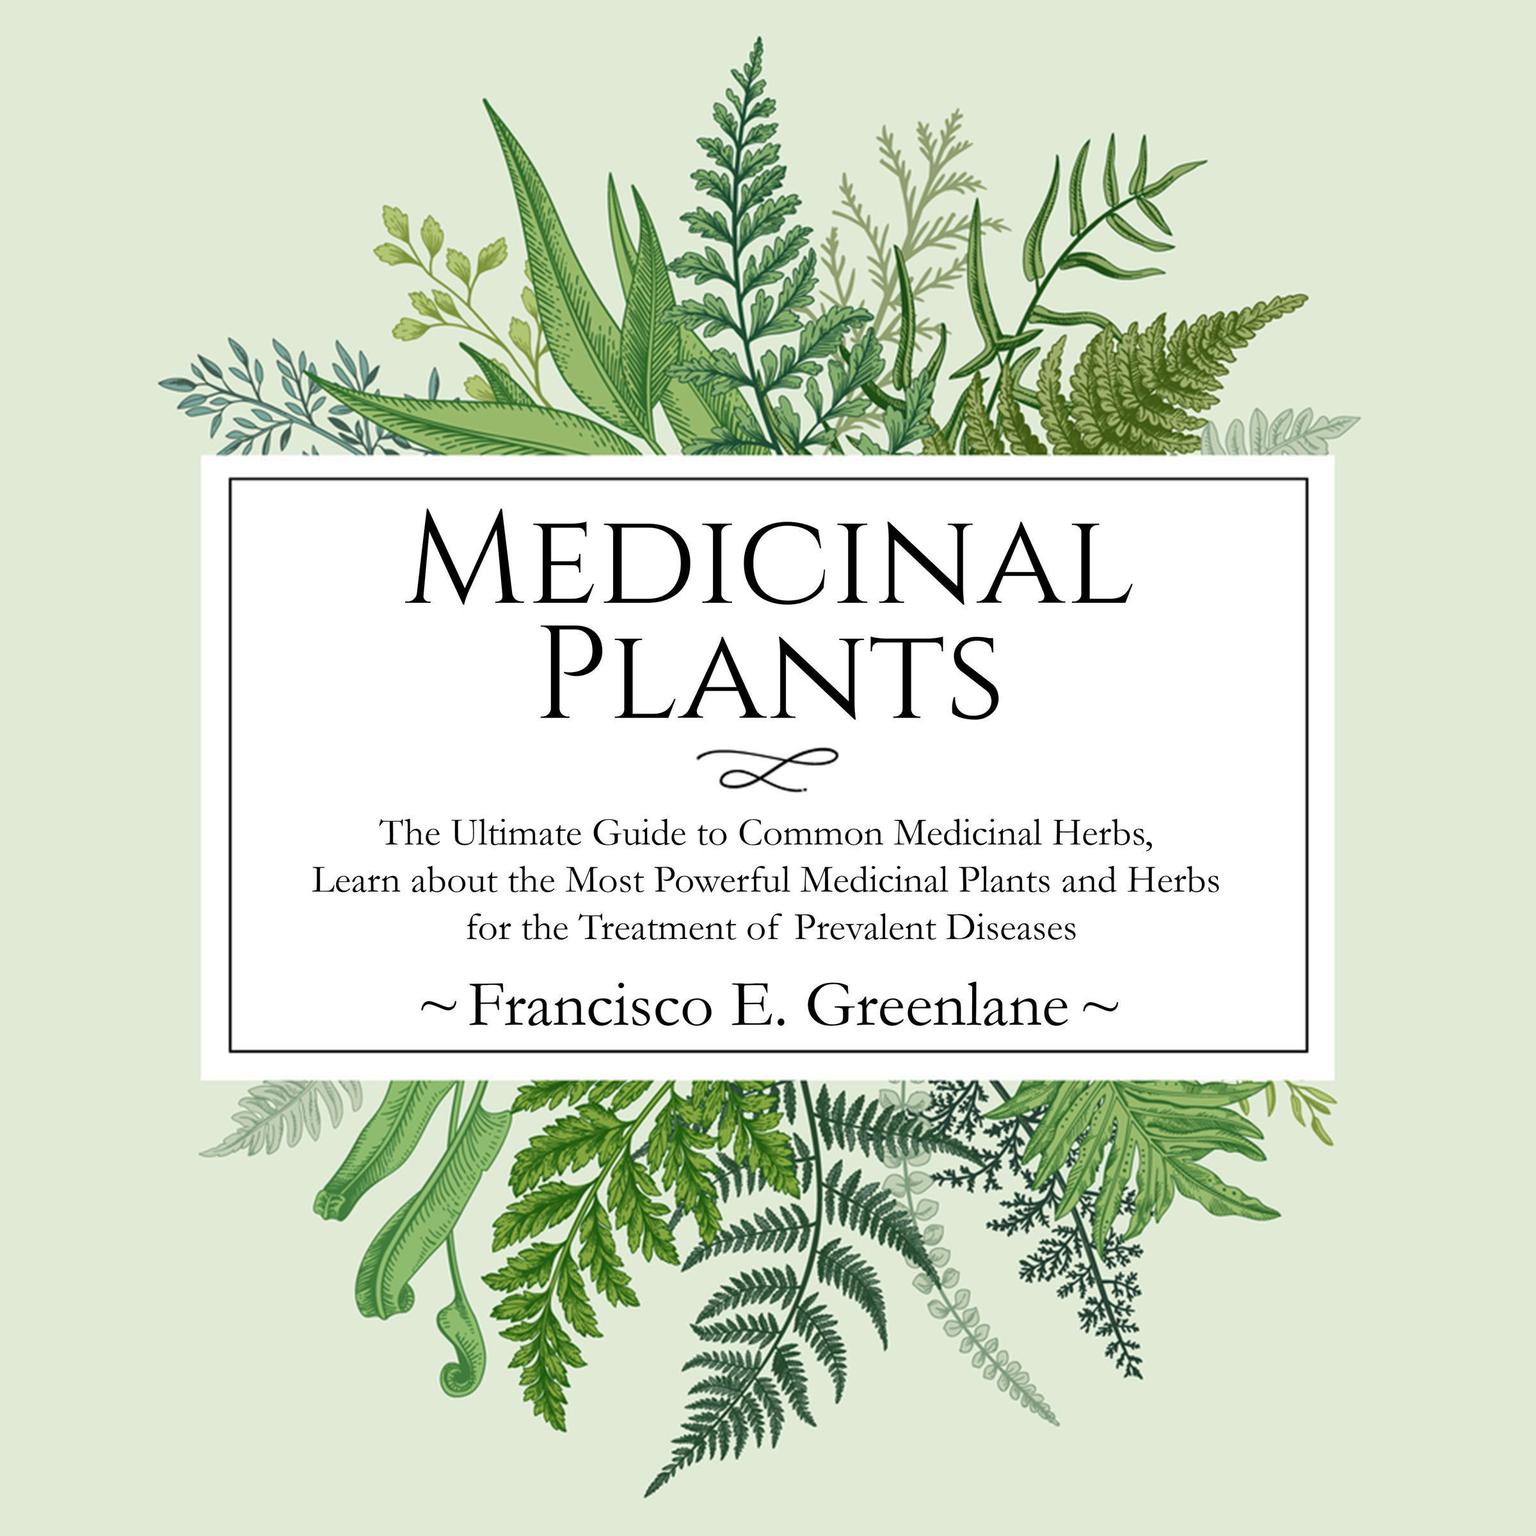 Medicinal Plants: The Ultimate Guide to Common Medicinal Herbs, Learn the Most Powerful Medicinal Plants and Herbs for the Treatment of Prevalent Diseases Audiobook, by Francisco E. Greenlane